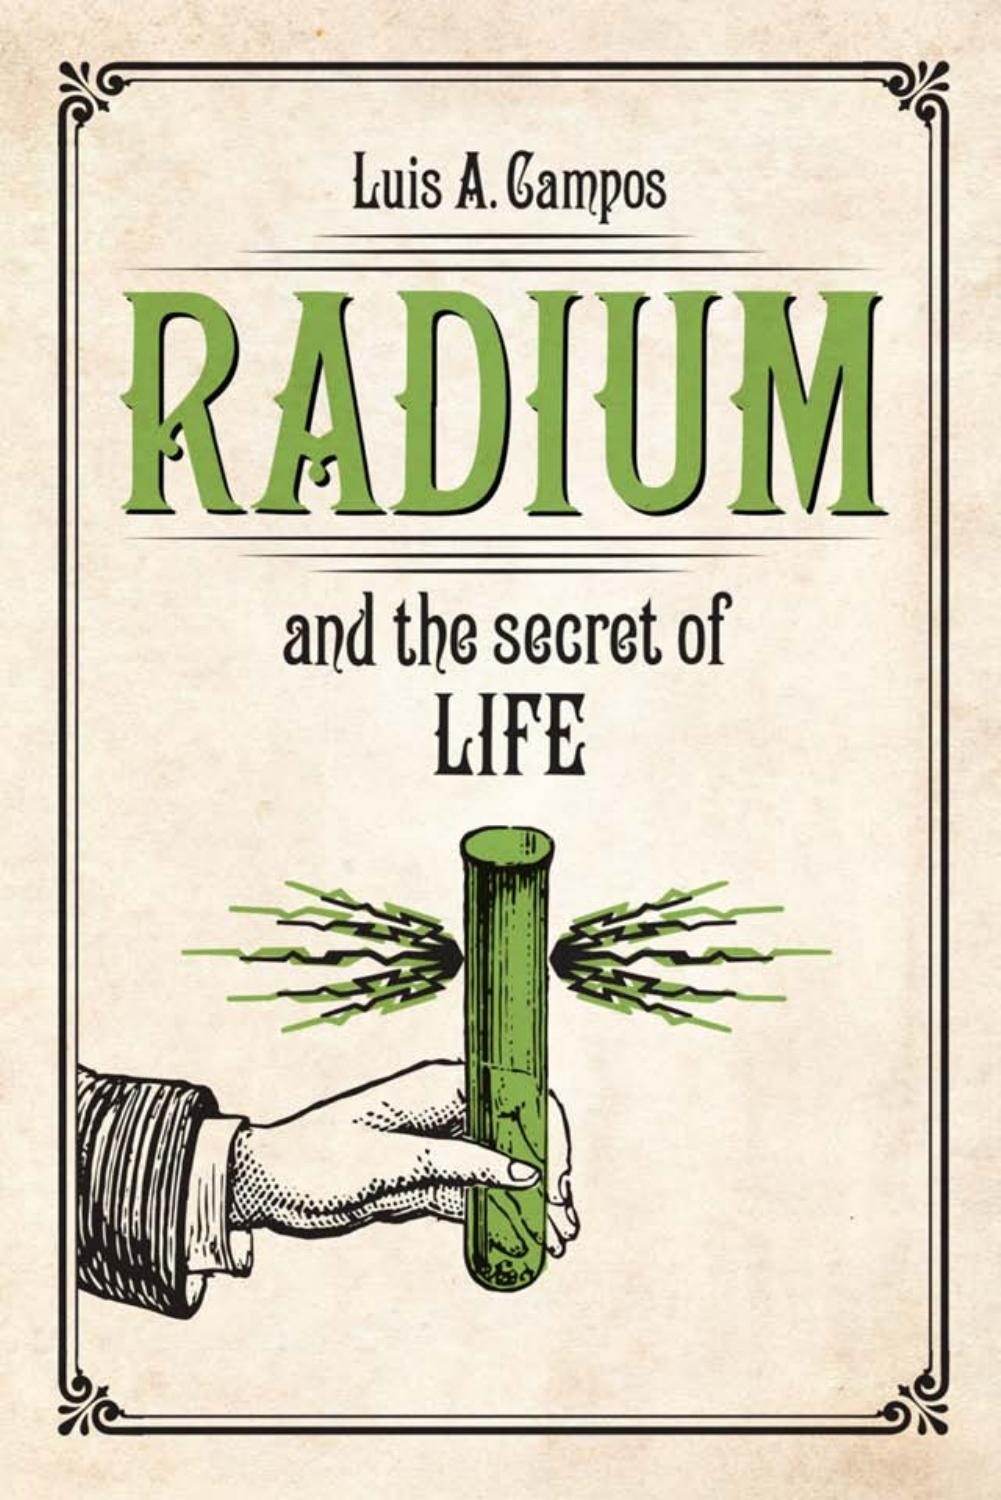 Radium and the Secret of Life by Luis A. Campos